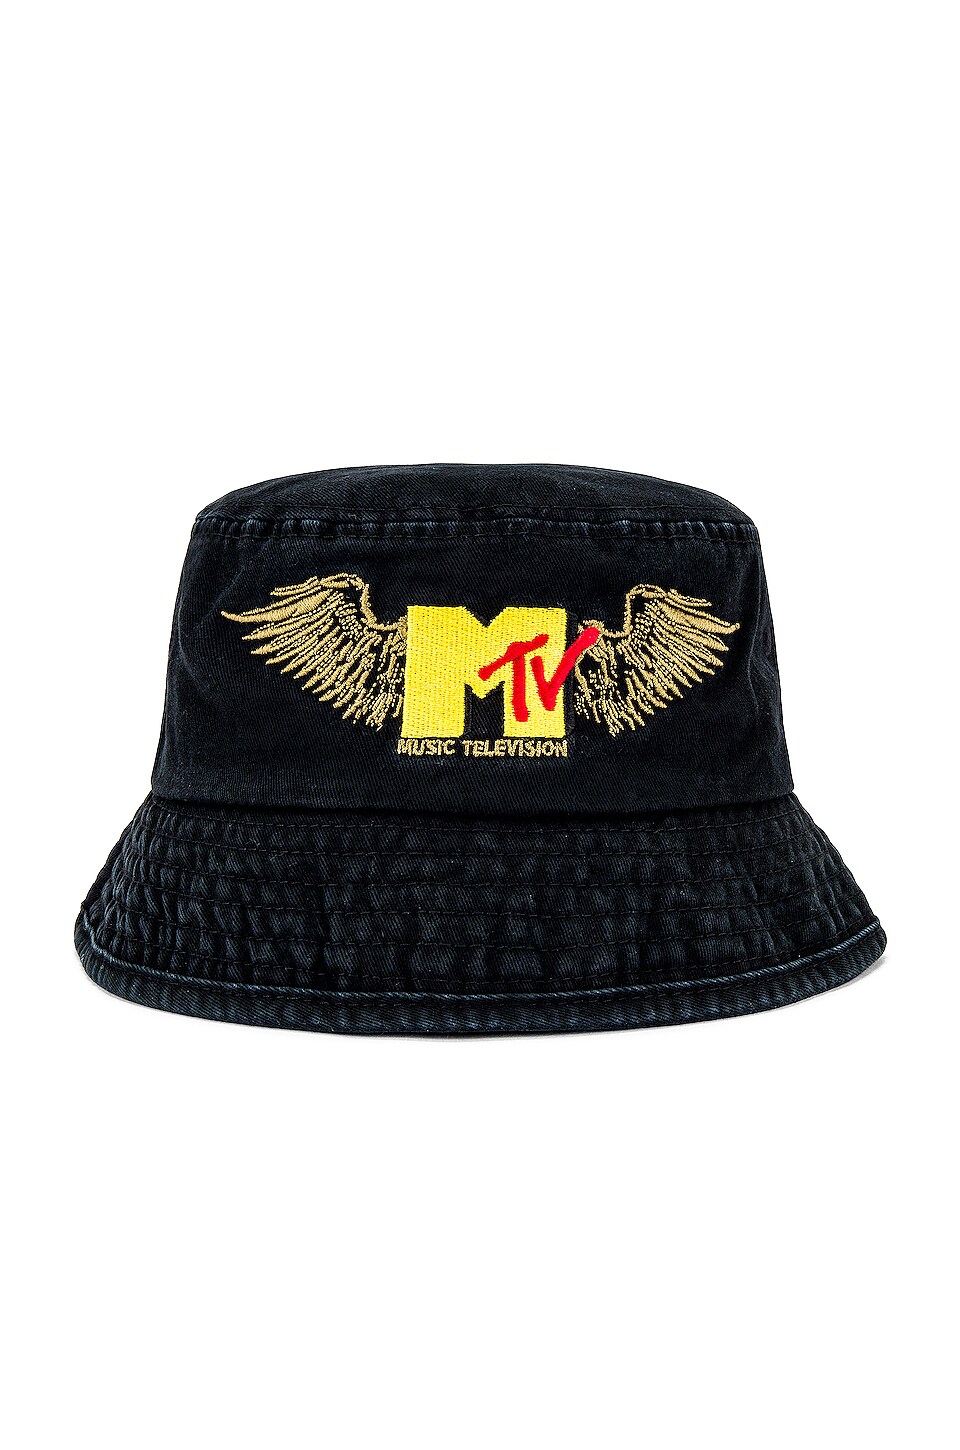 ROLLA'S MTV Wings Bucket Hat Washed Black